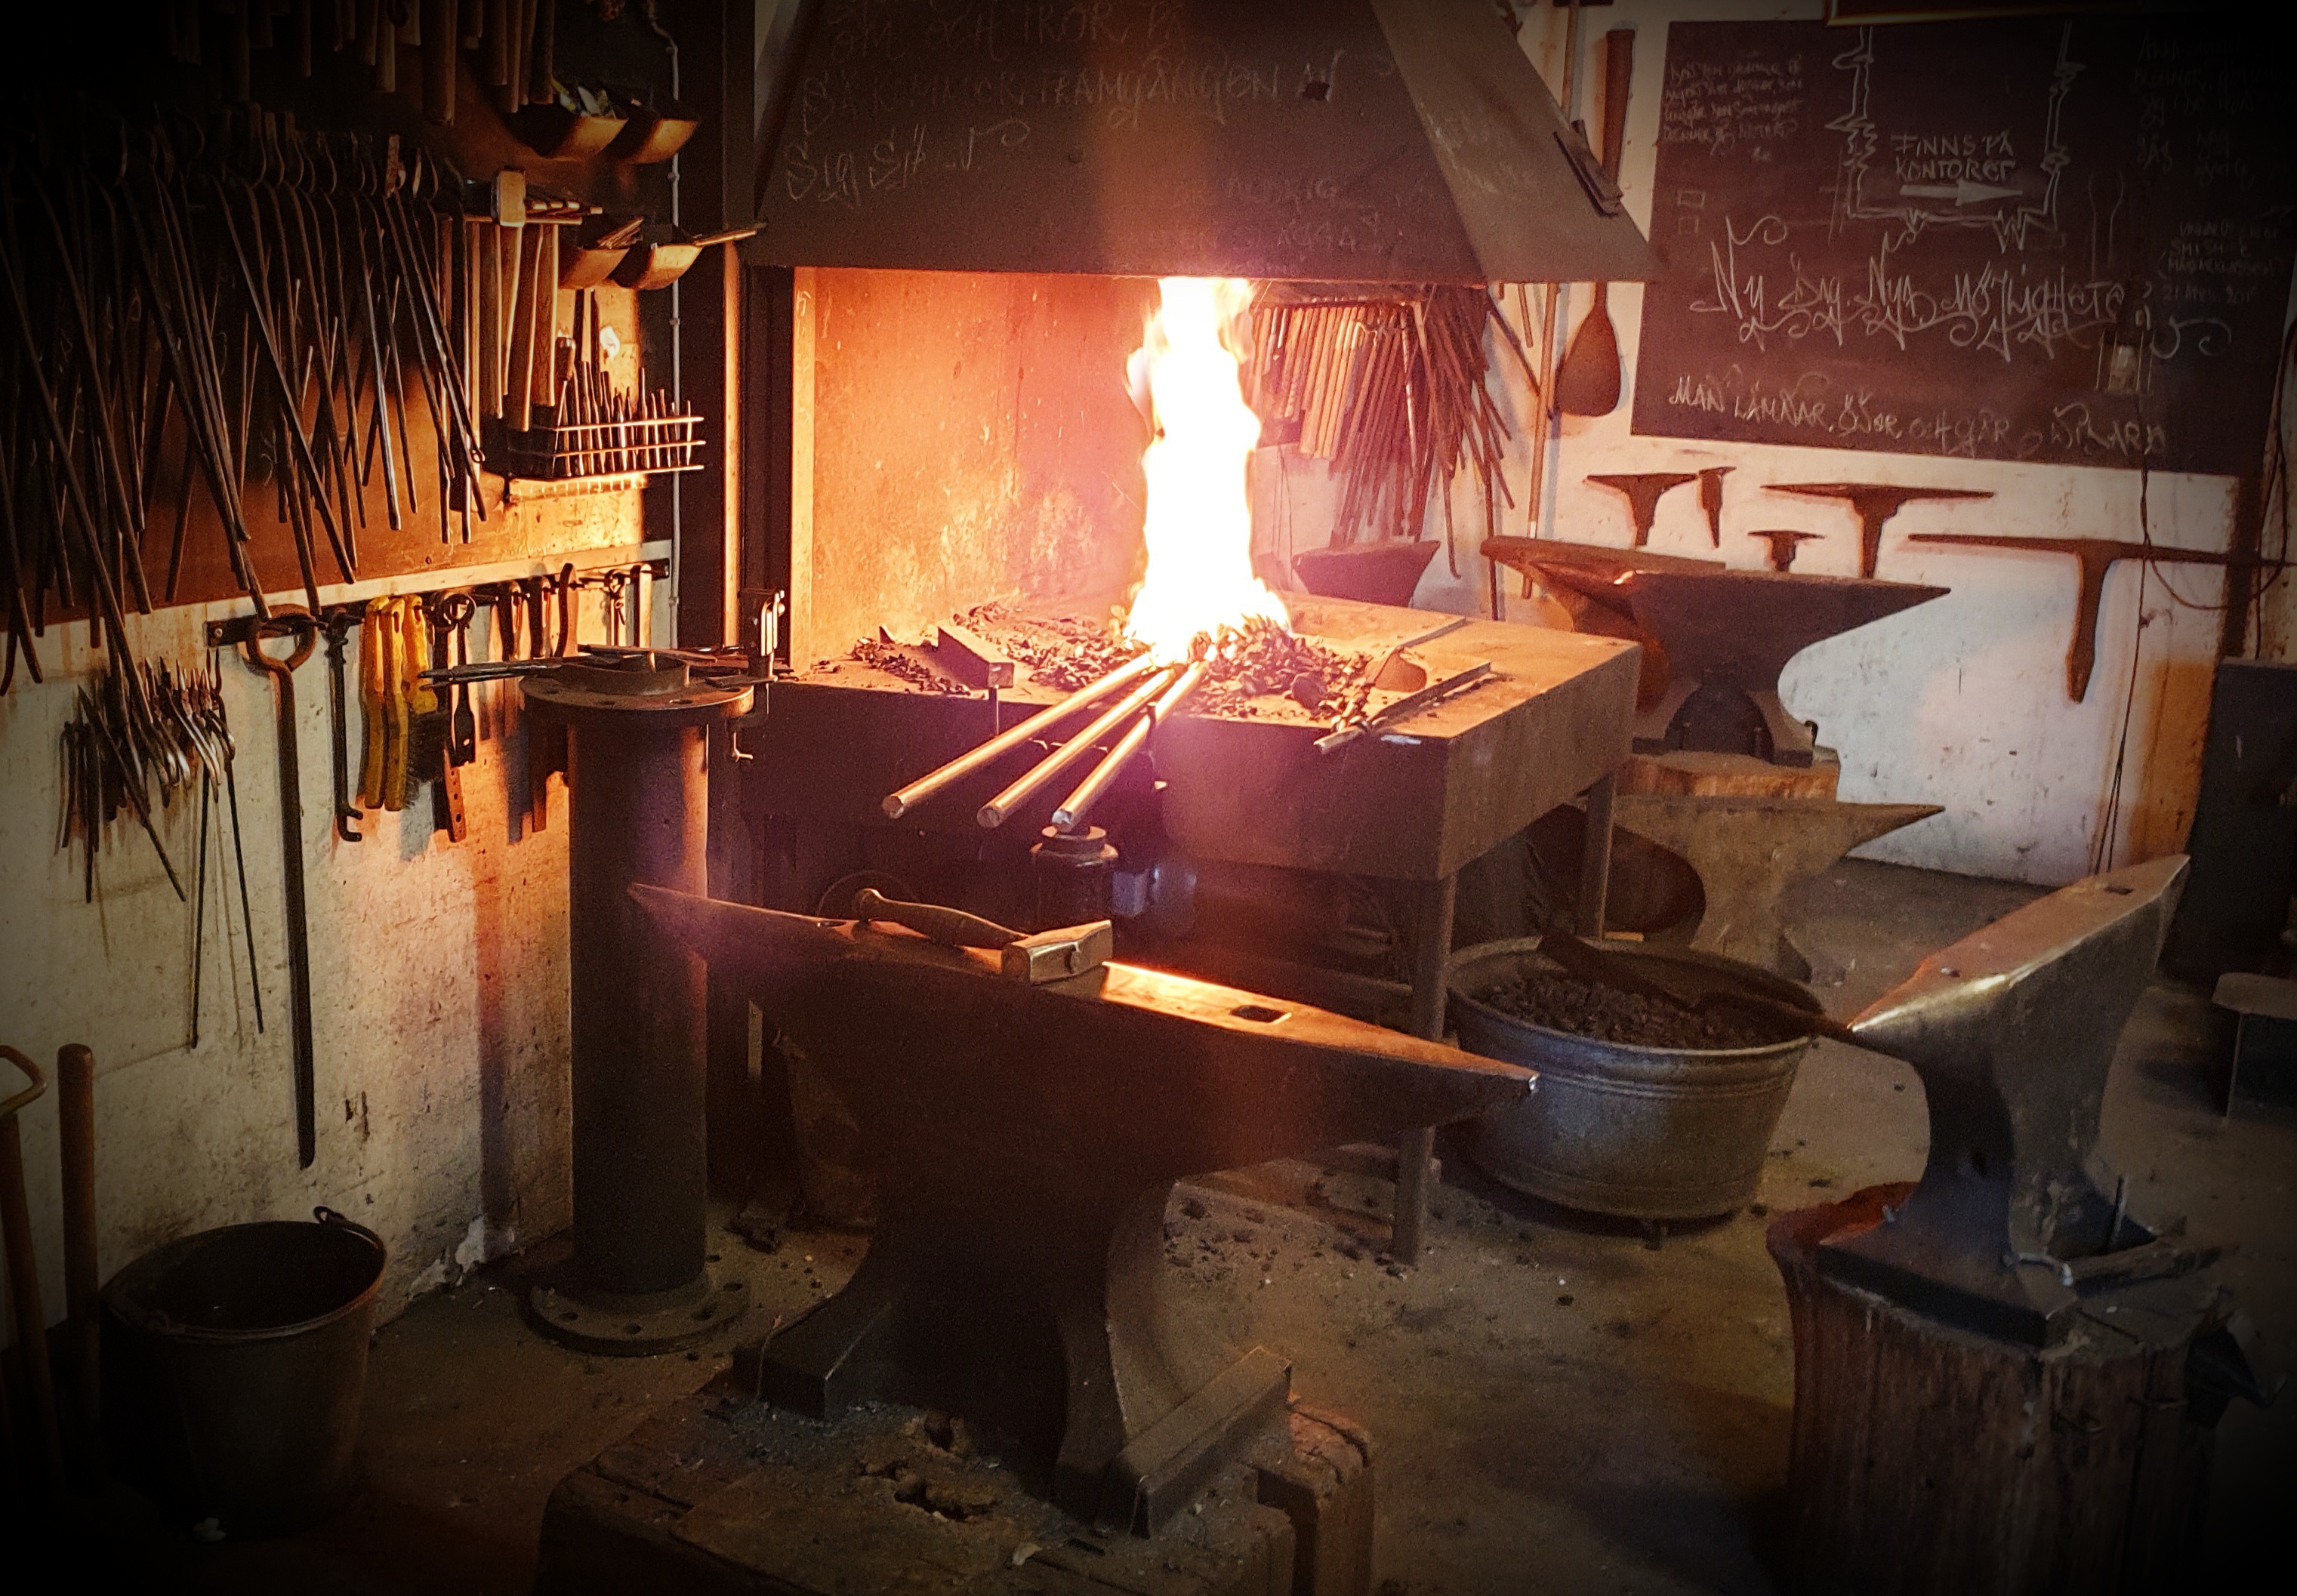 In the forge